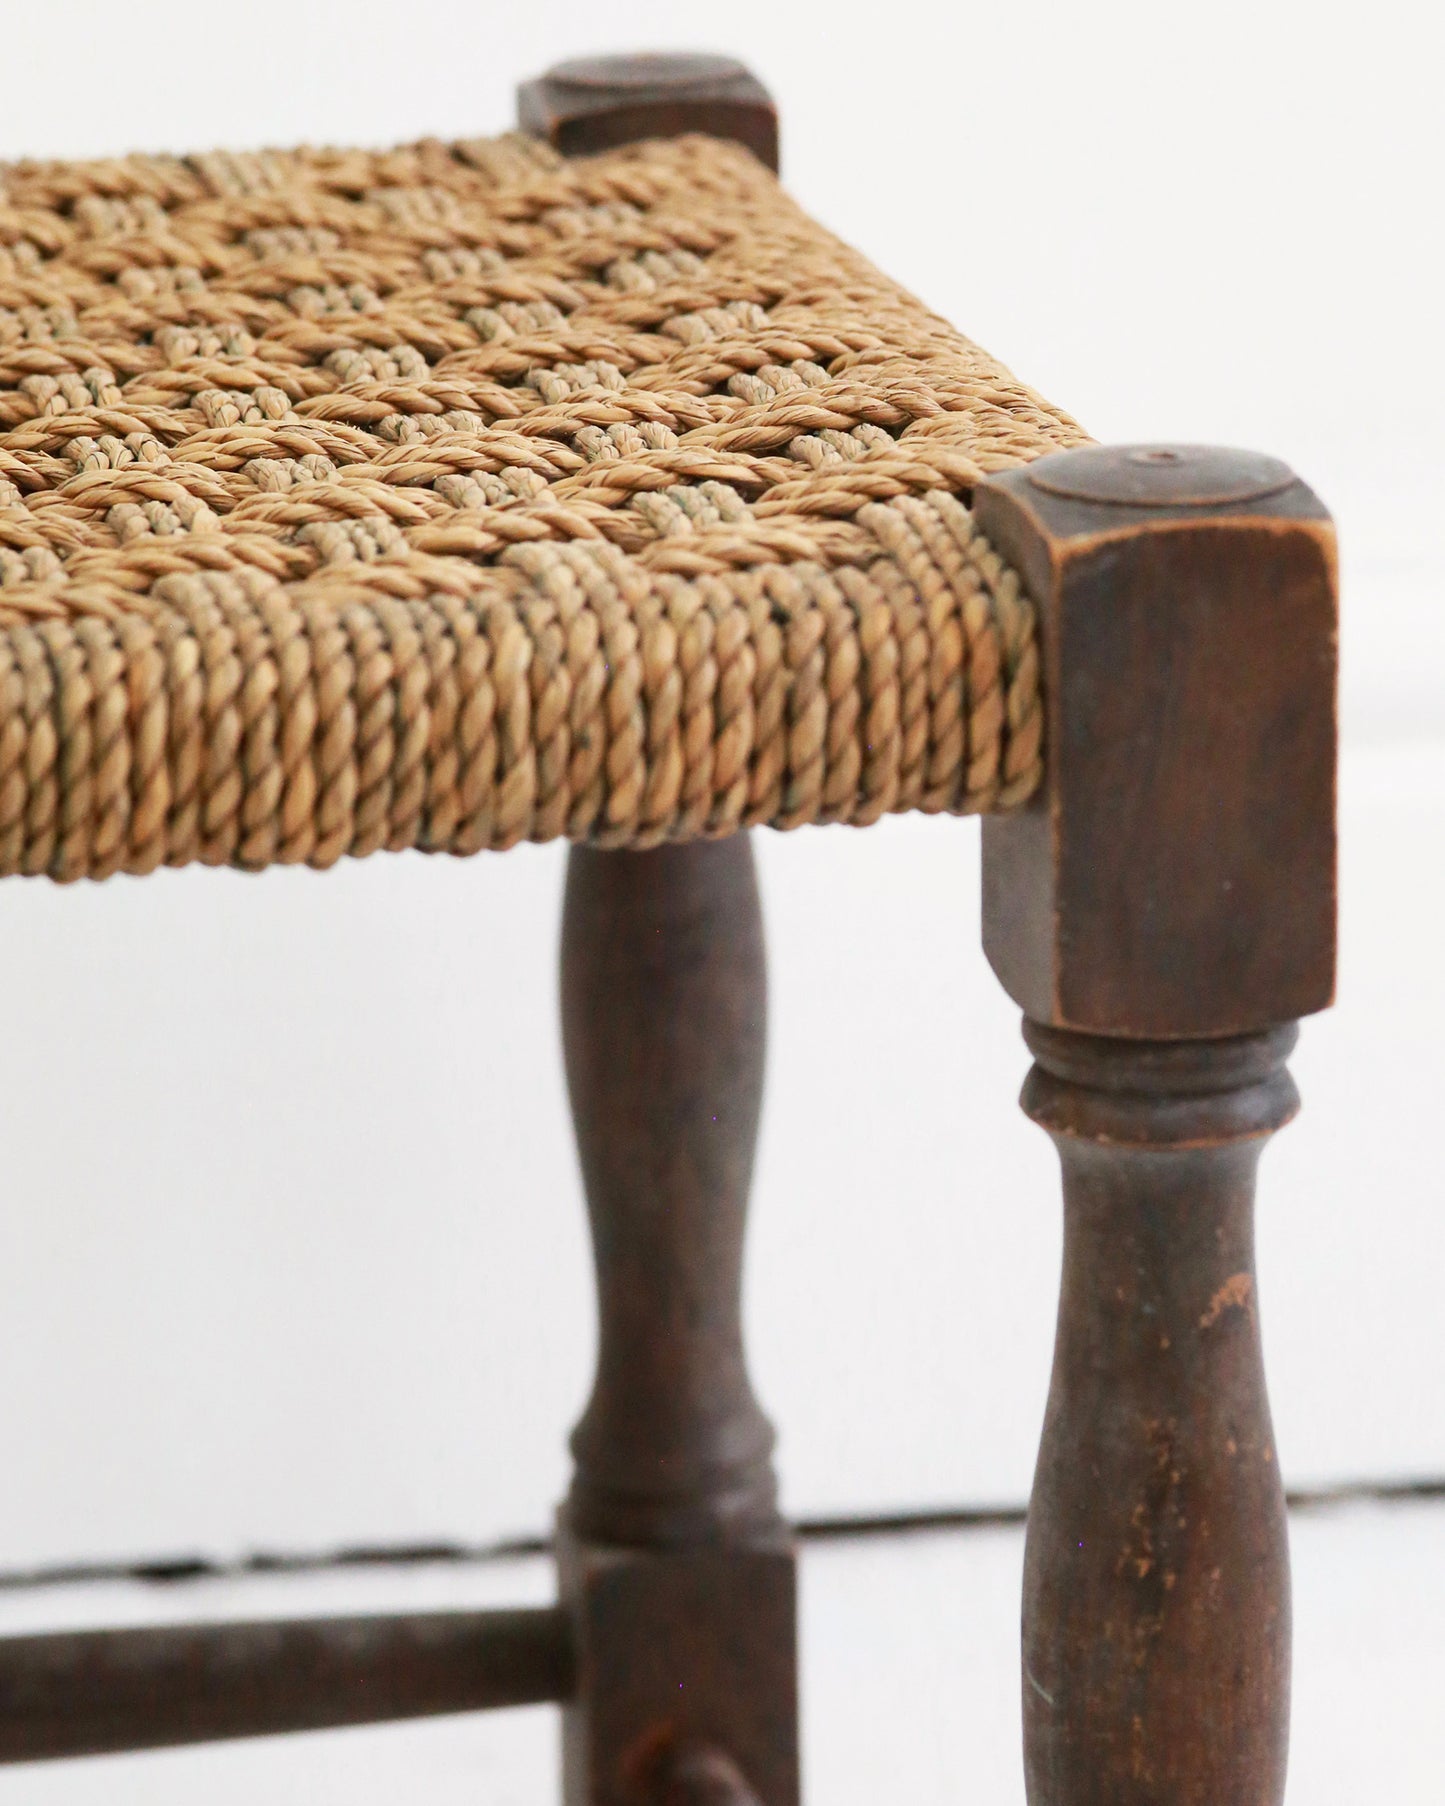 Woven rope detail to vintage wooden footstool